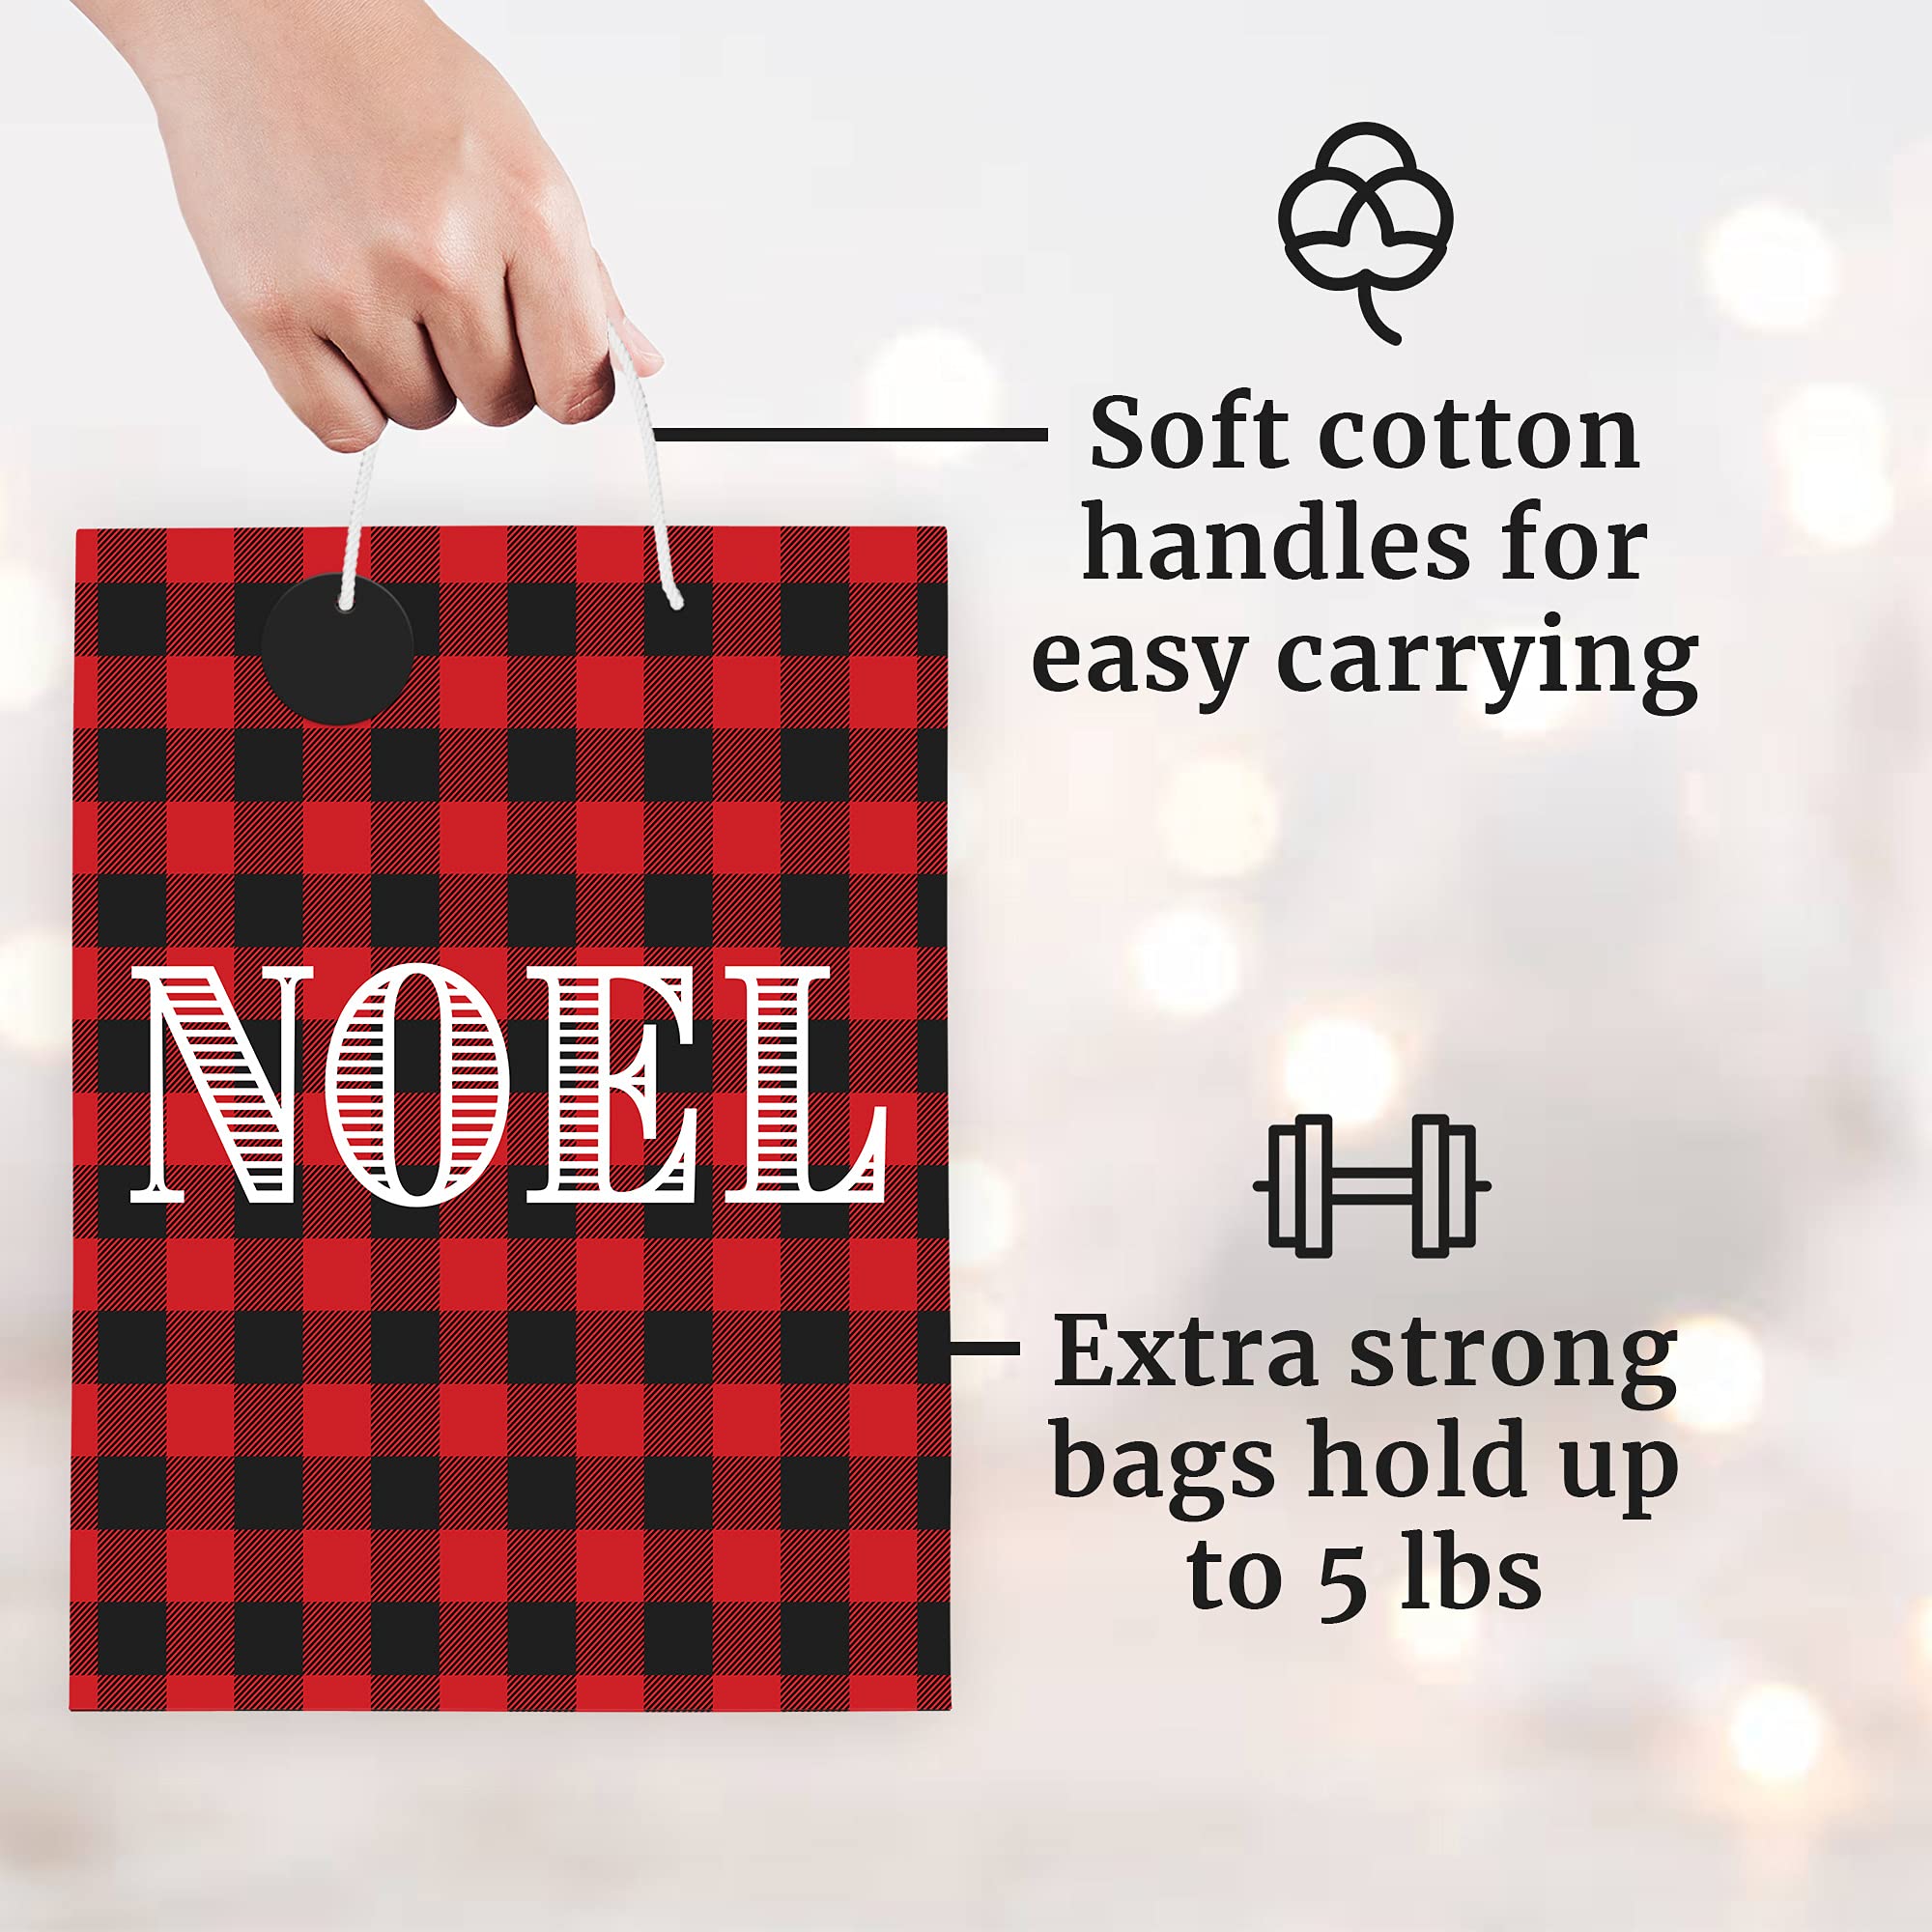 Perfect Occasion Plaid Christmas Gift Bags - 6 Pack - Medium Size 10